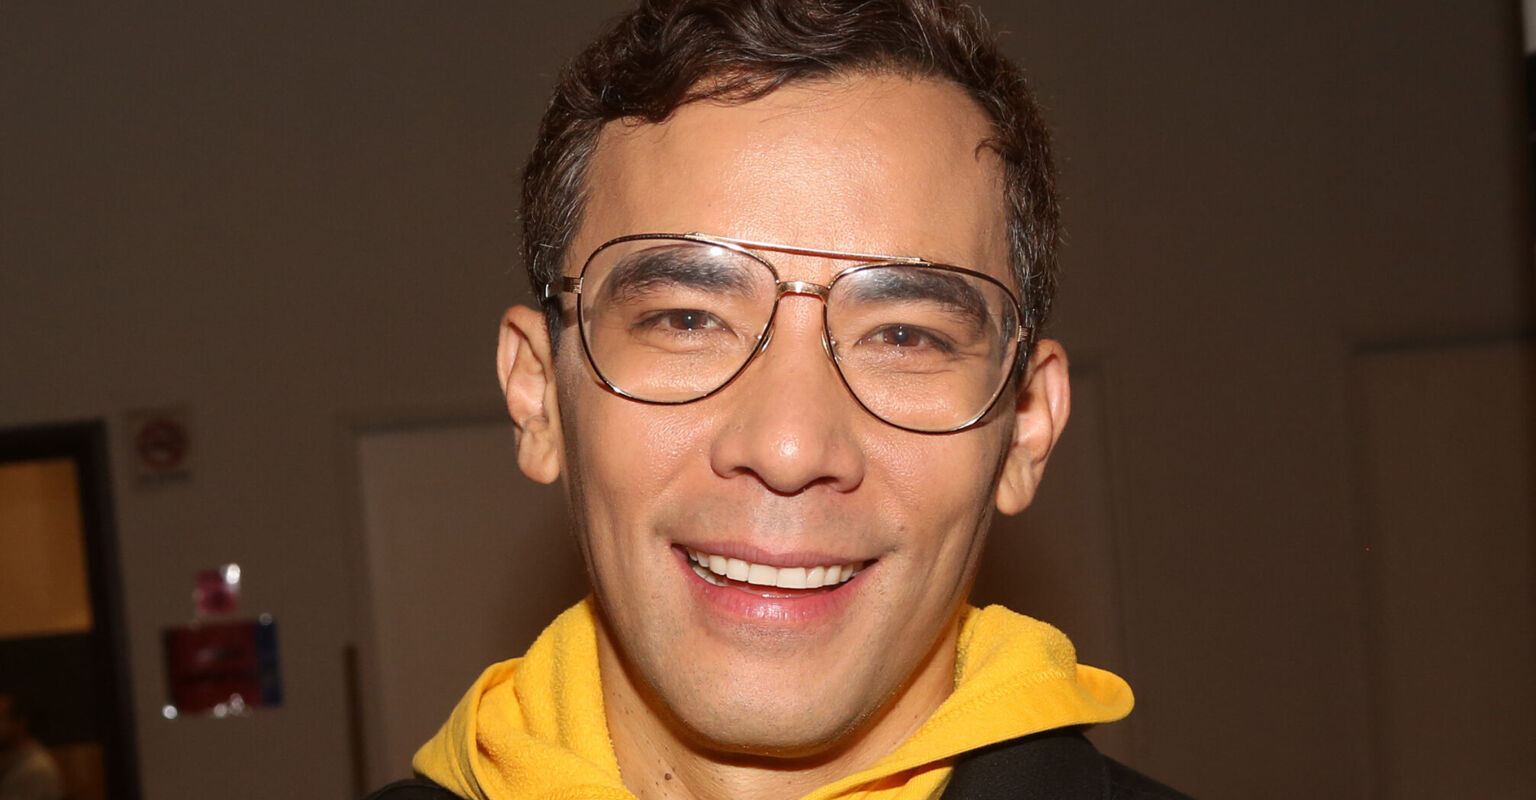 Fire Island Actor Conrad Ricamora Will Gladly PlayCharacters